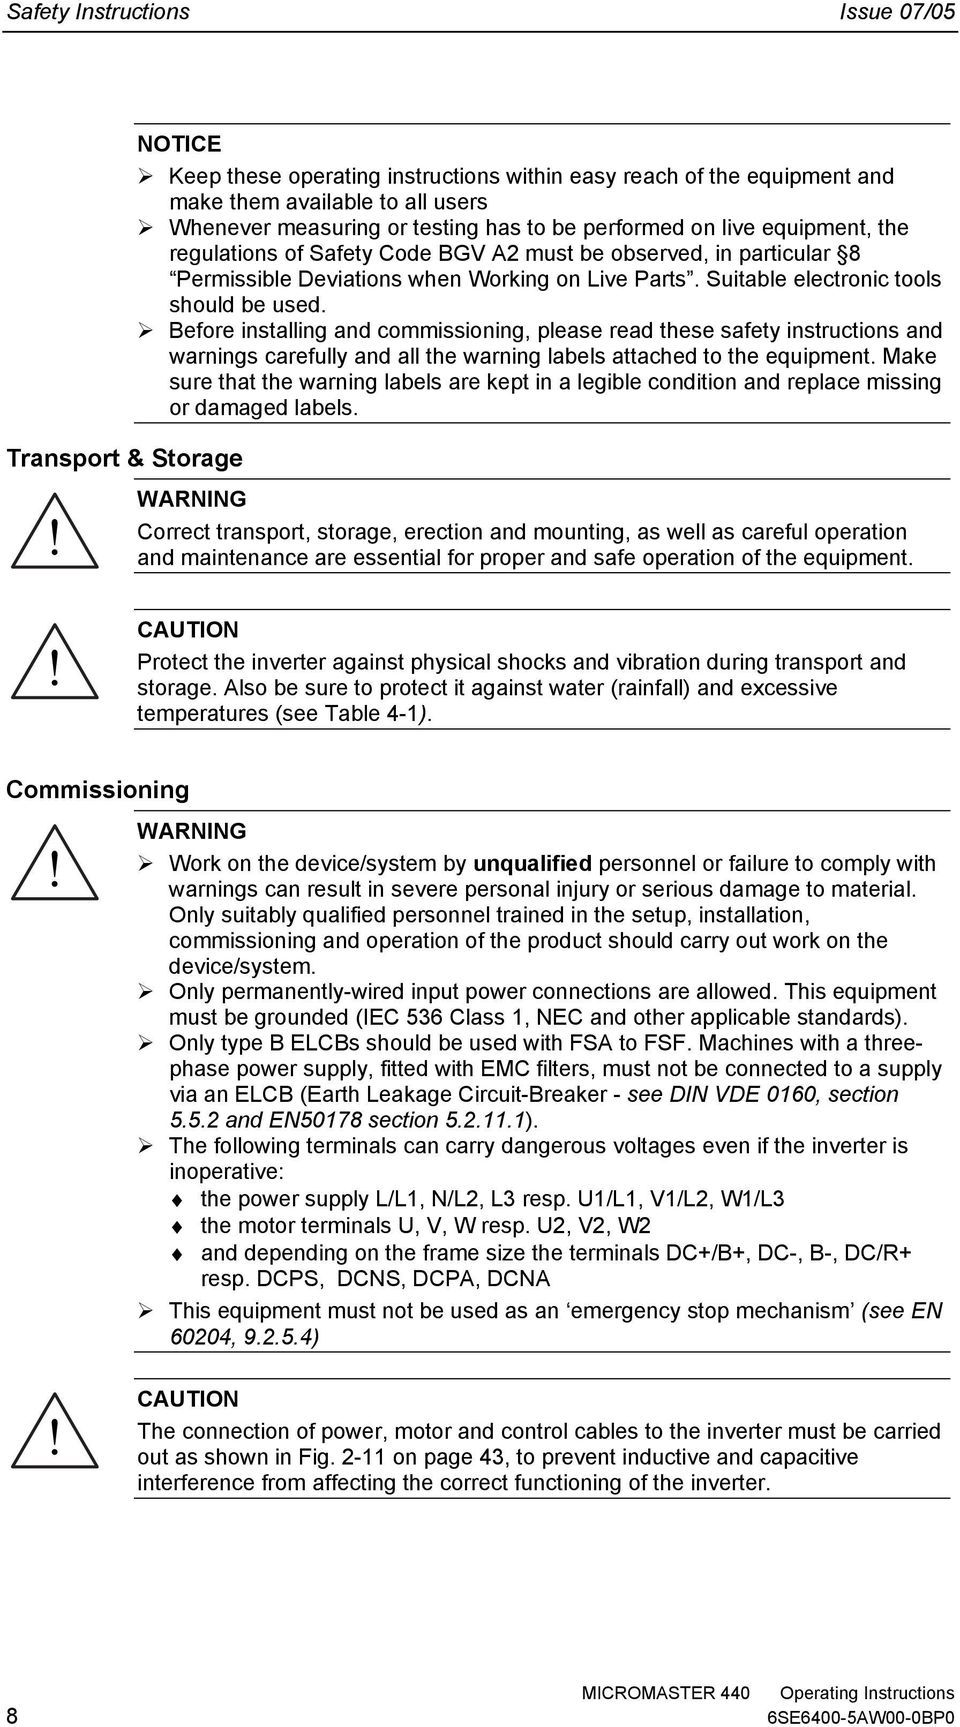 Before installing and commissioning, please read these safety instructions and warnings carefully and all the warning labels attached to the equipment.